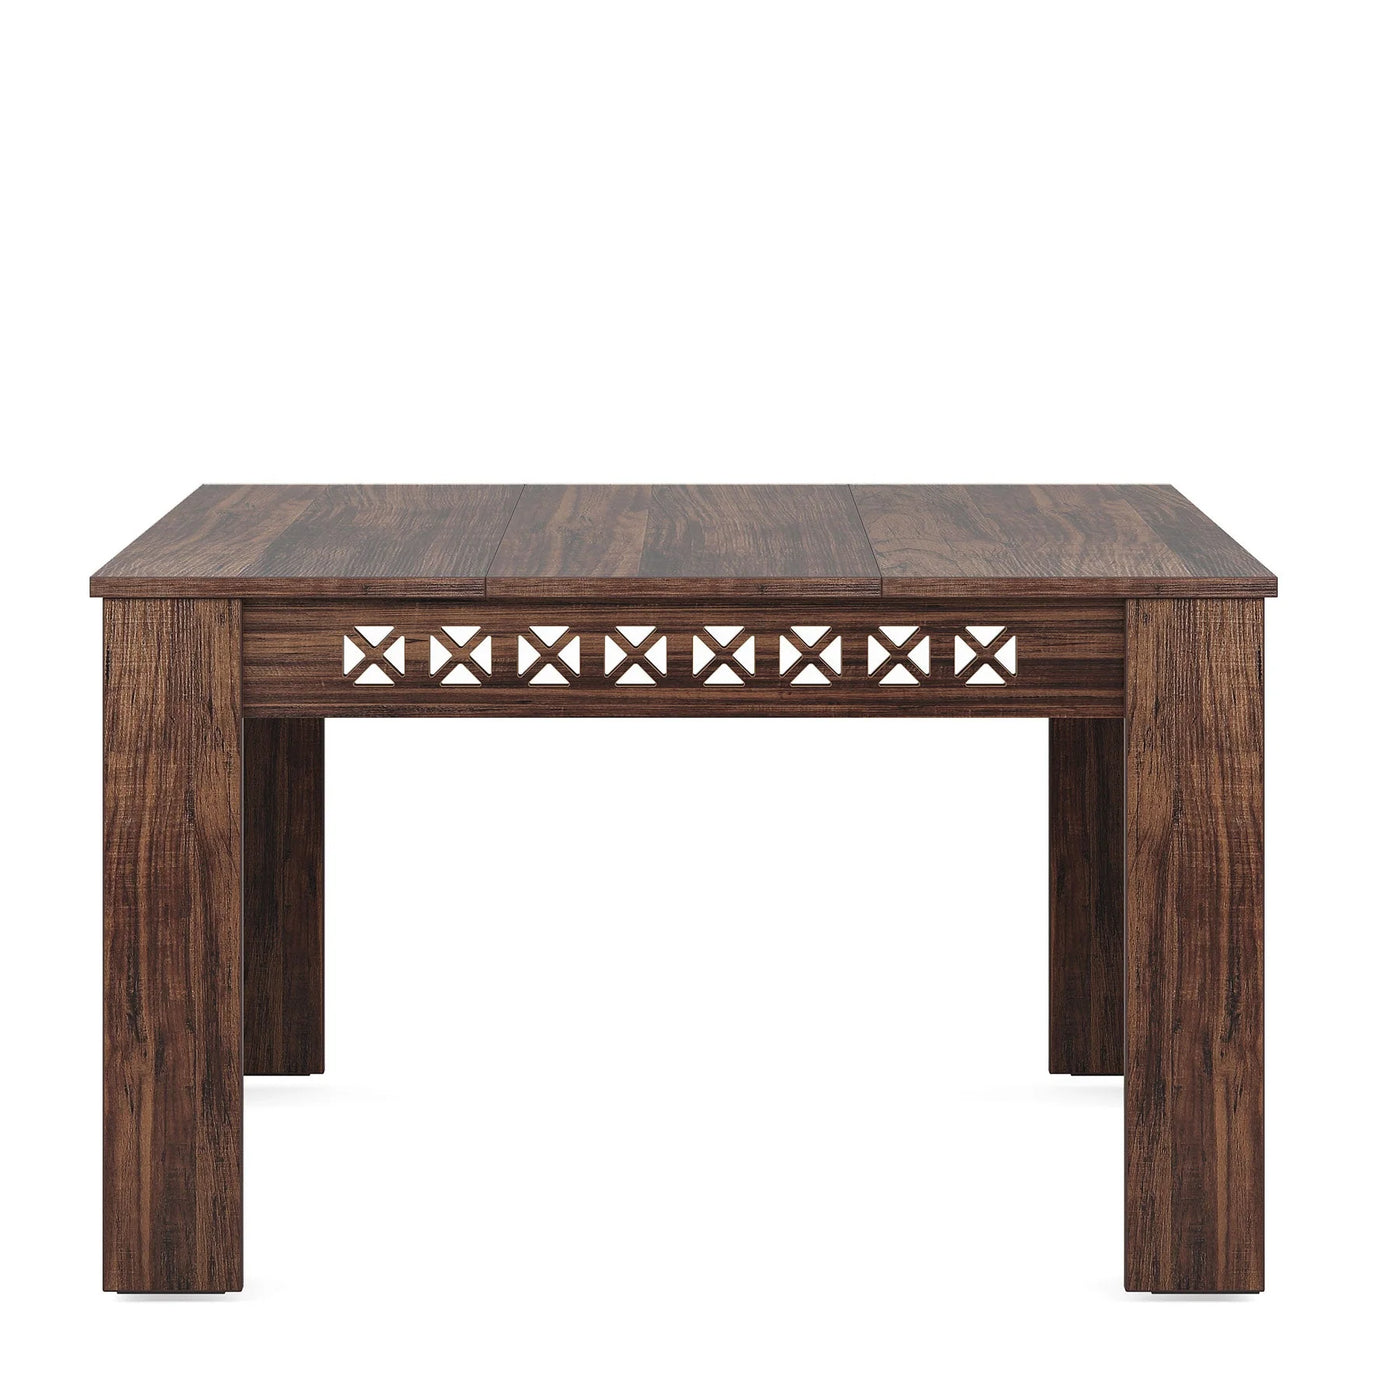 Anais Wooden Dining Table | Small Square Kitchen Table for 4